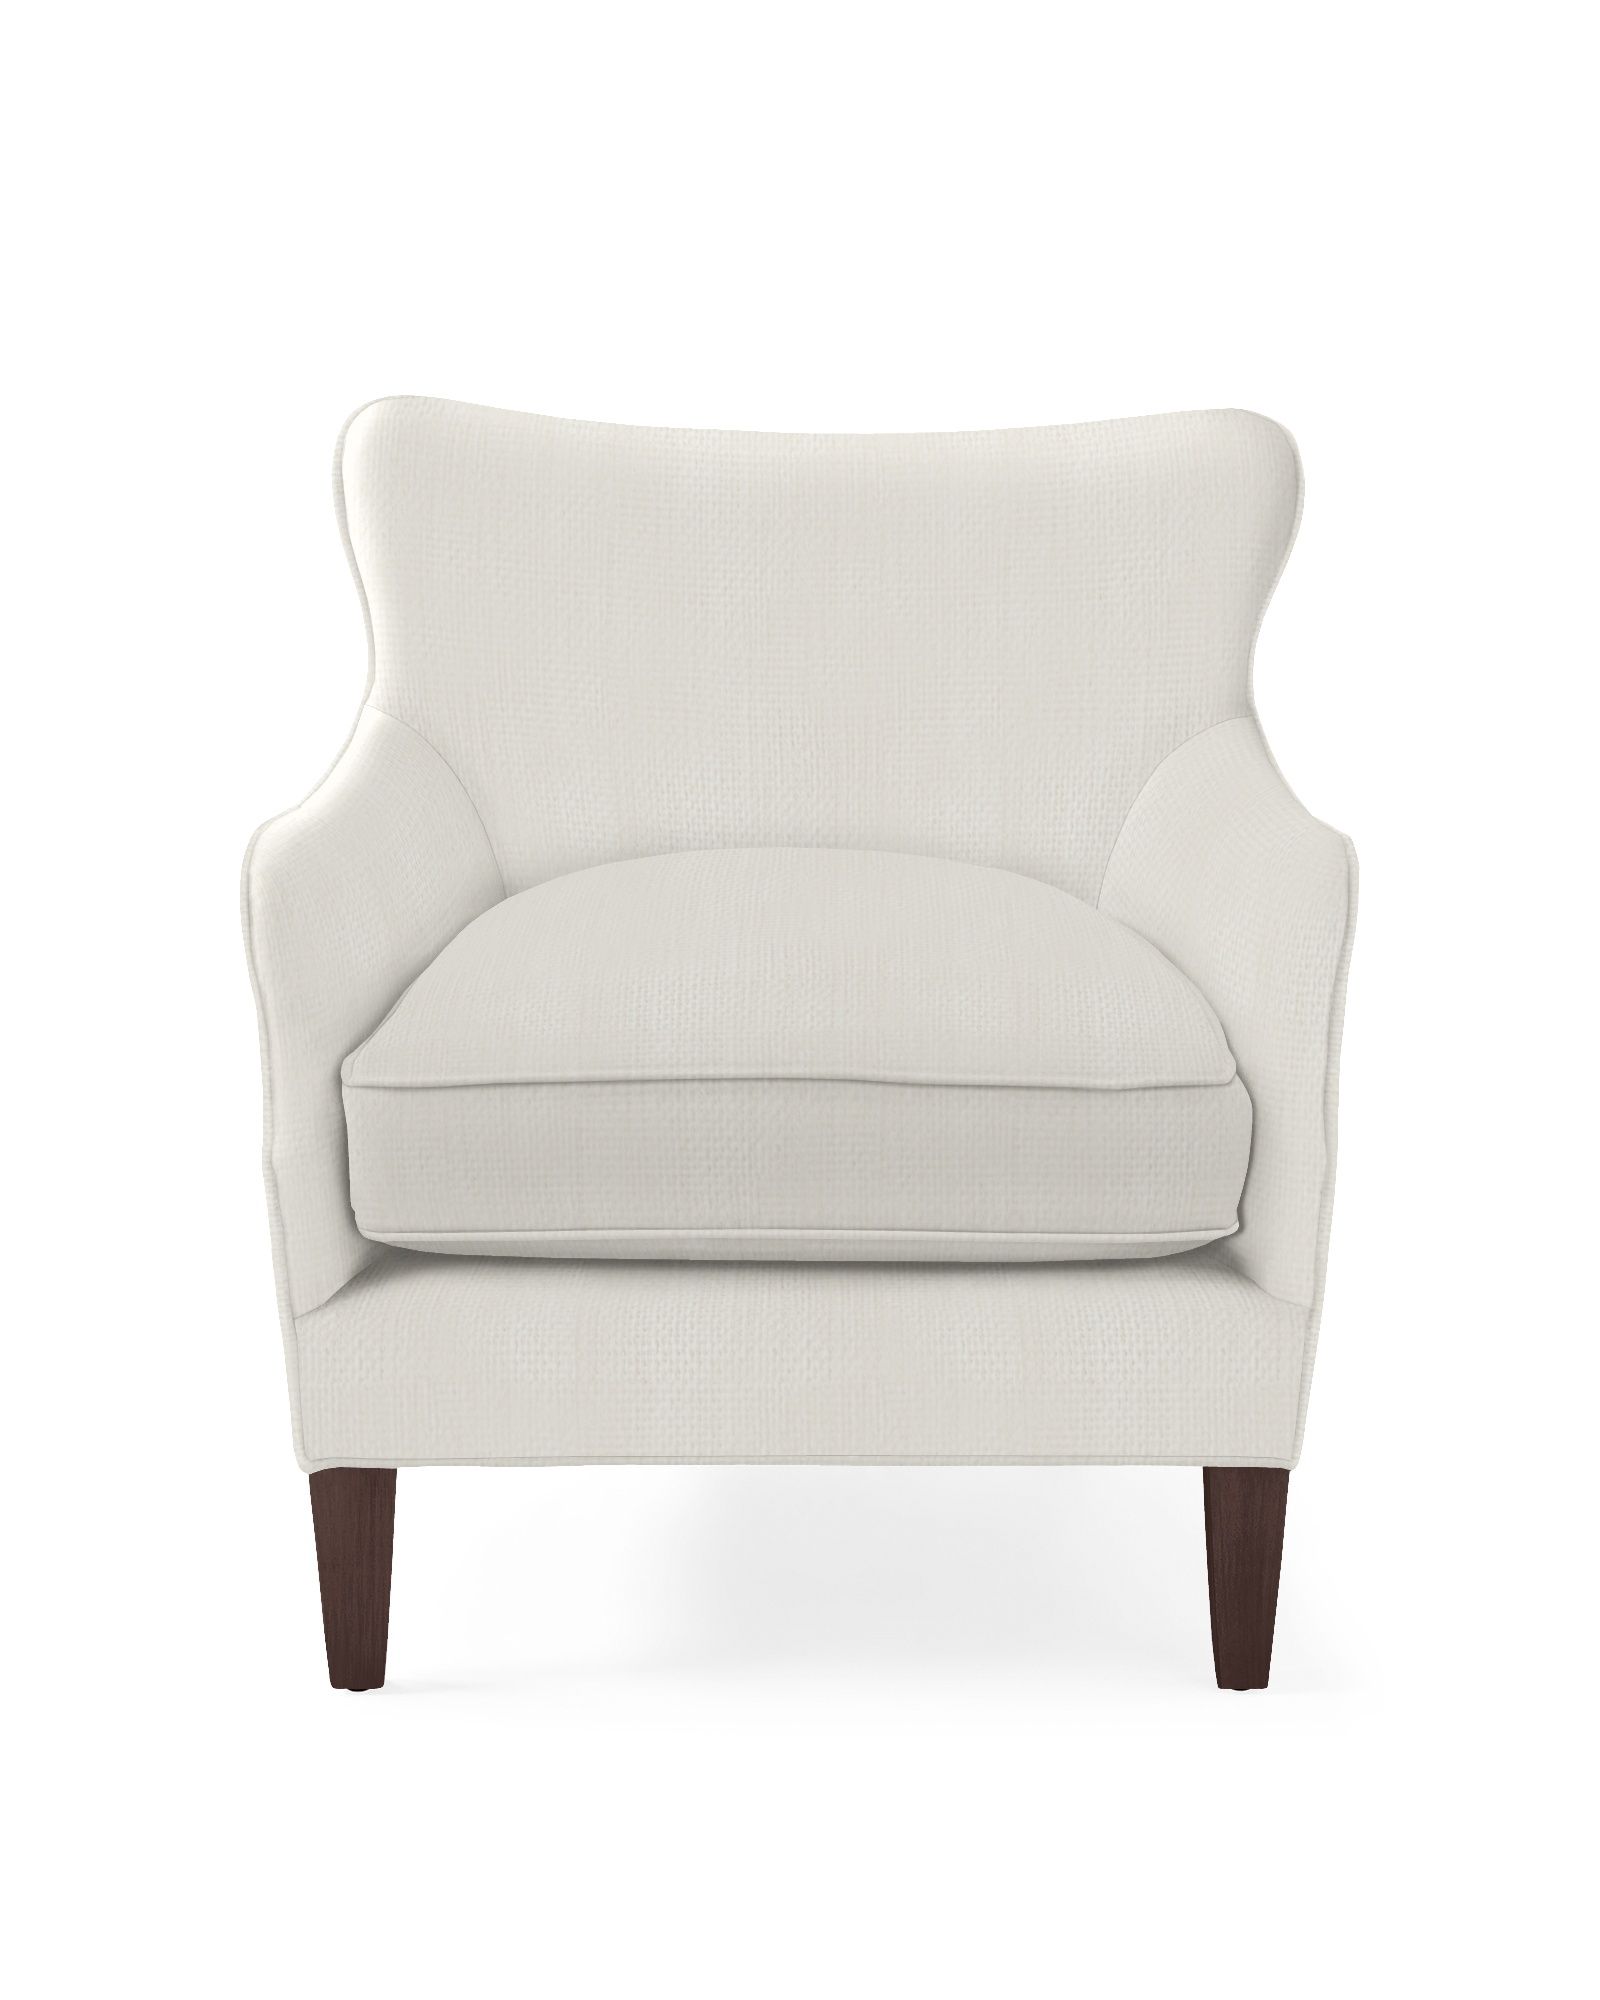 Elm Chair | Serena and Lily